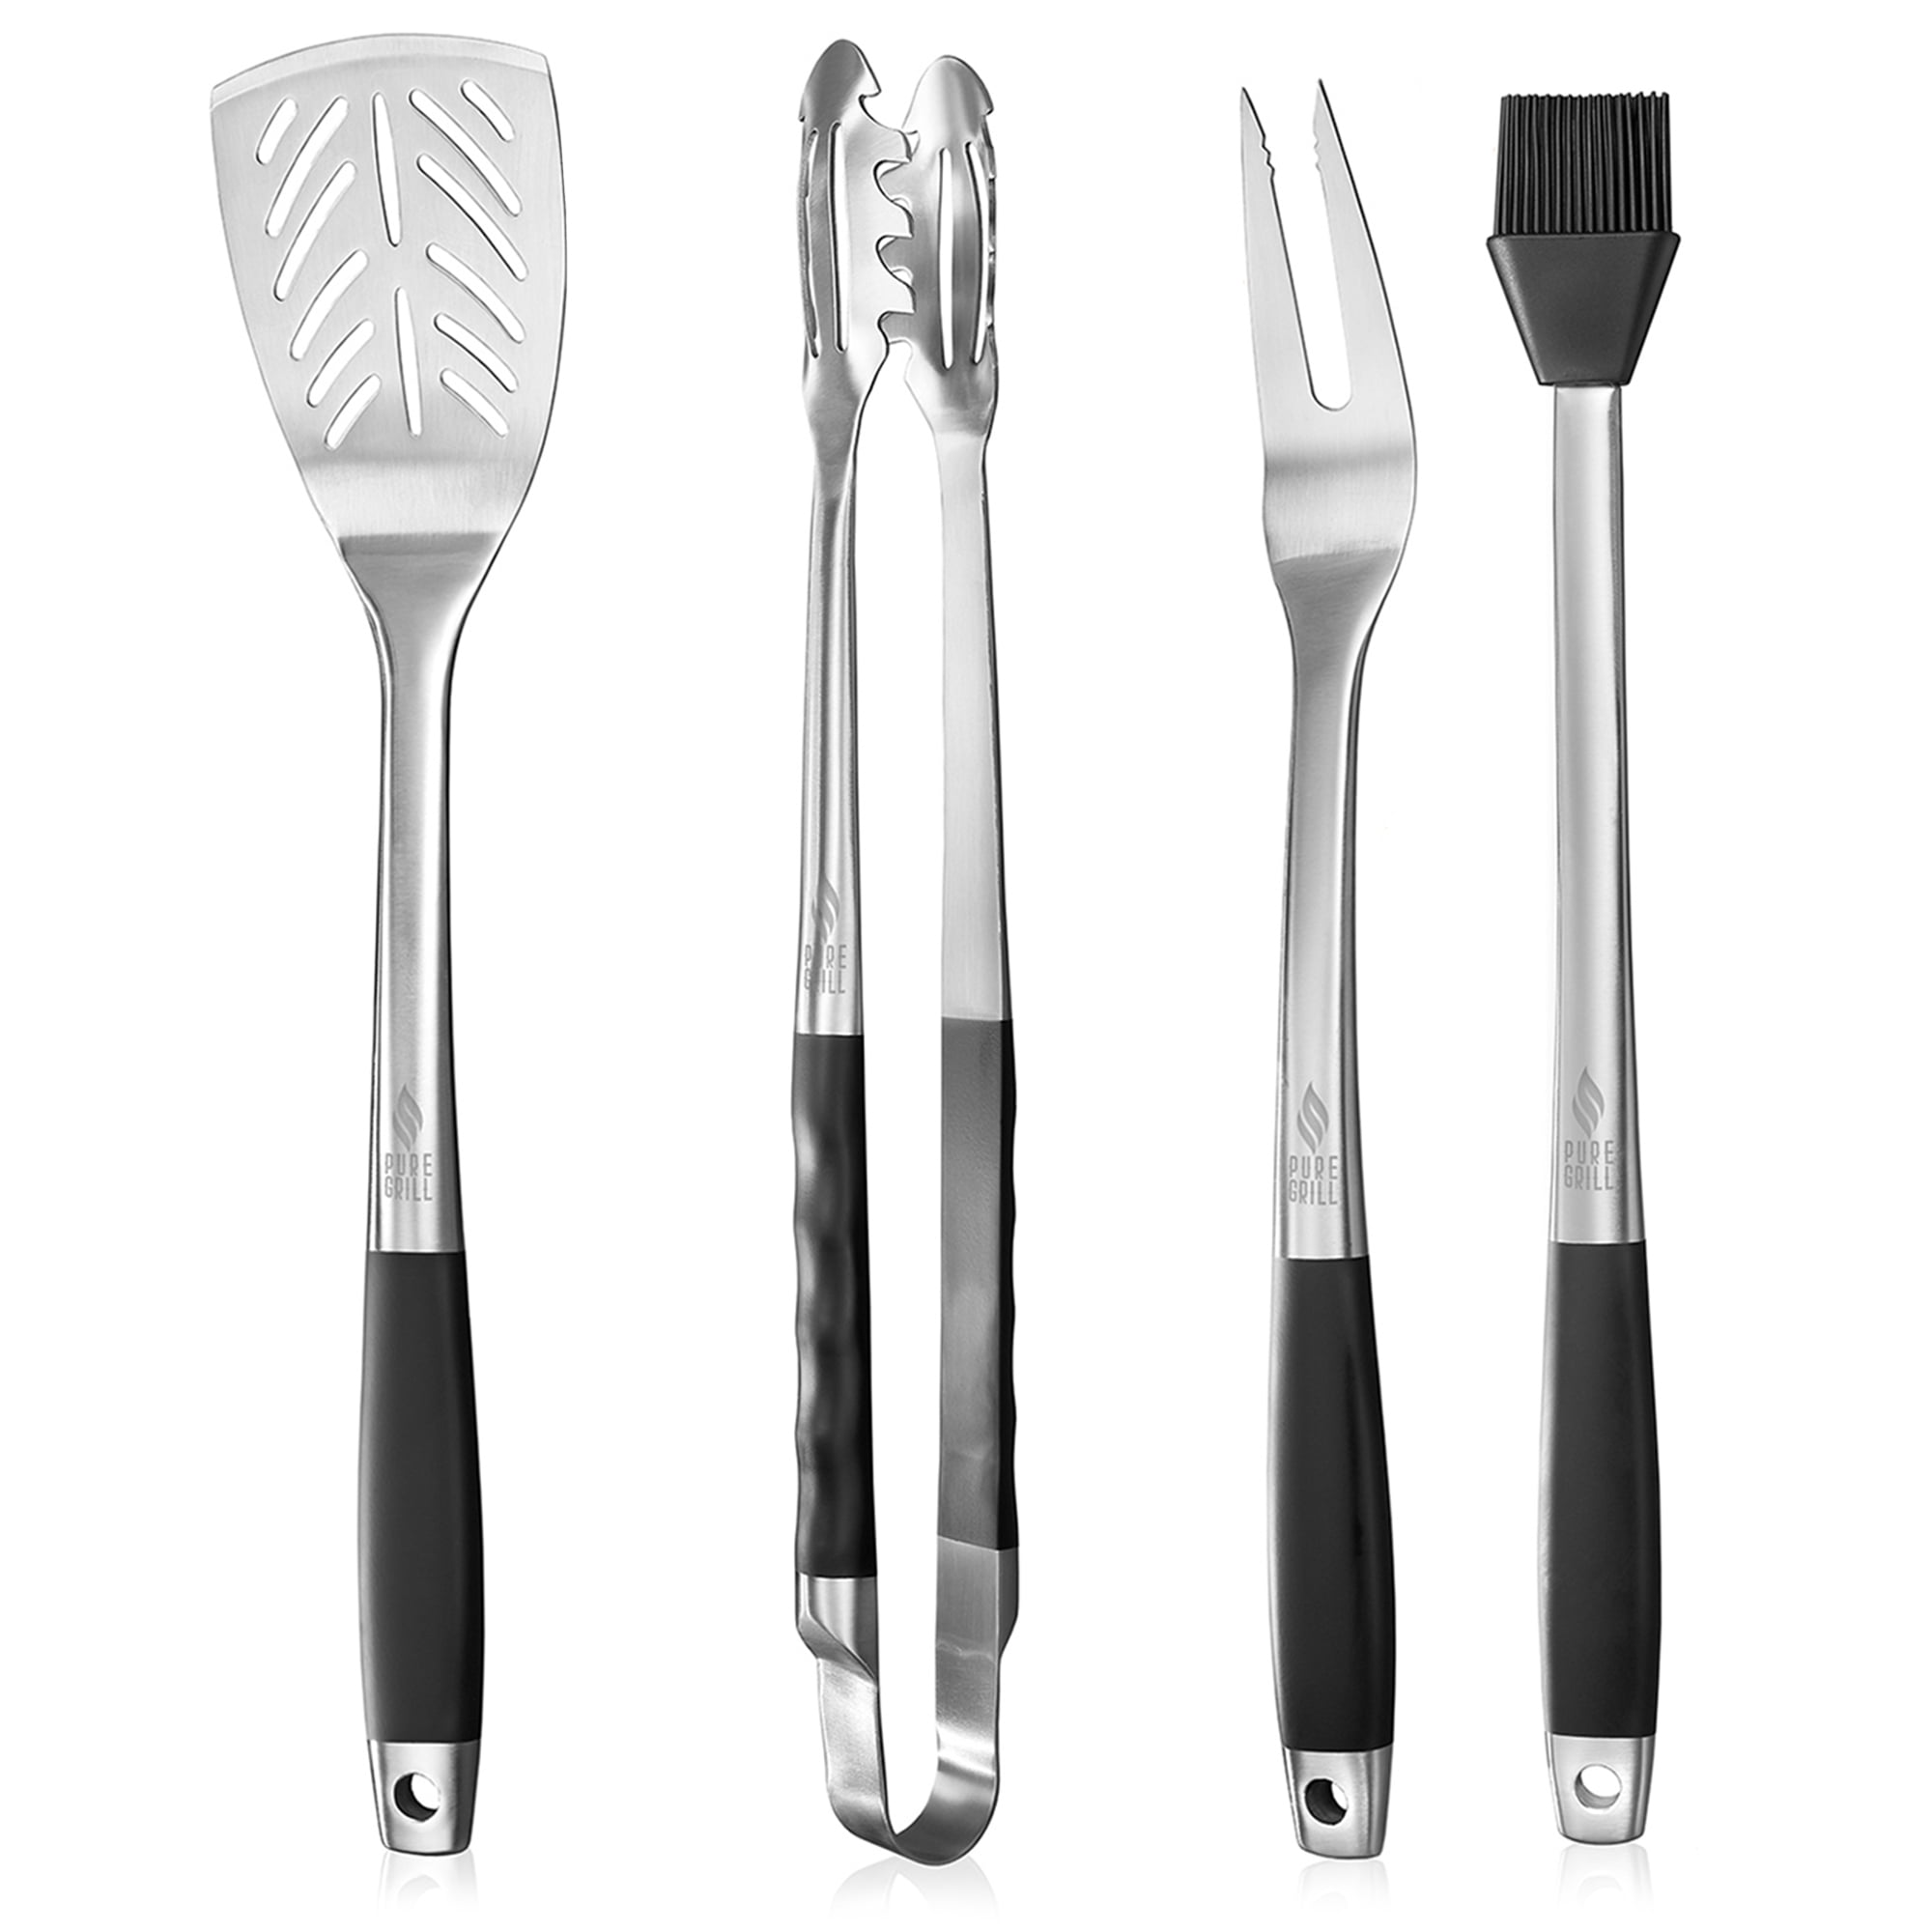 4pc Stainless Steel Wooden Barbecue Set Grill Grilling Tool Fork Spatula BBQ Set 